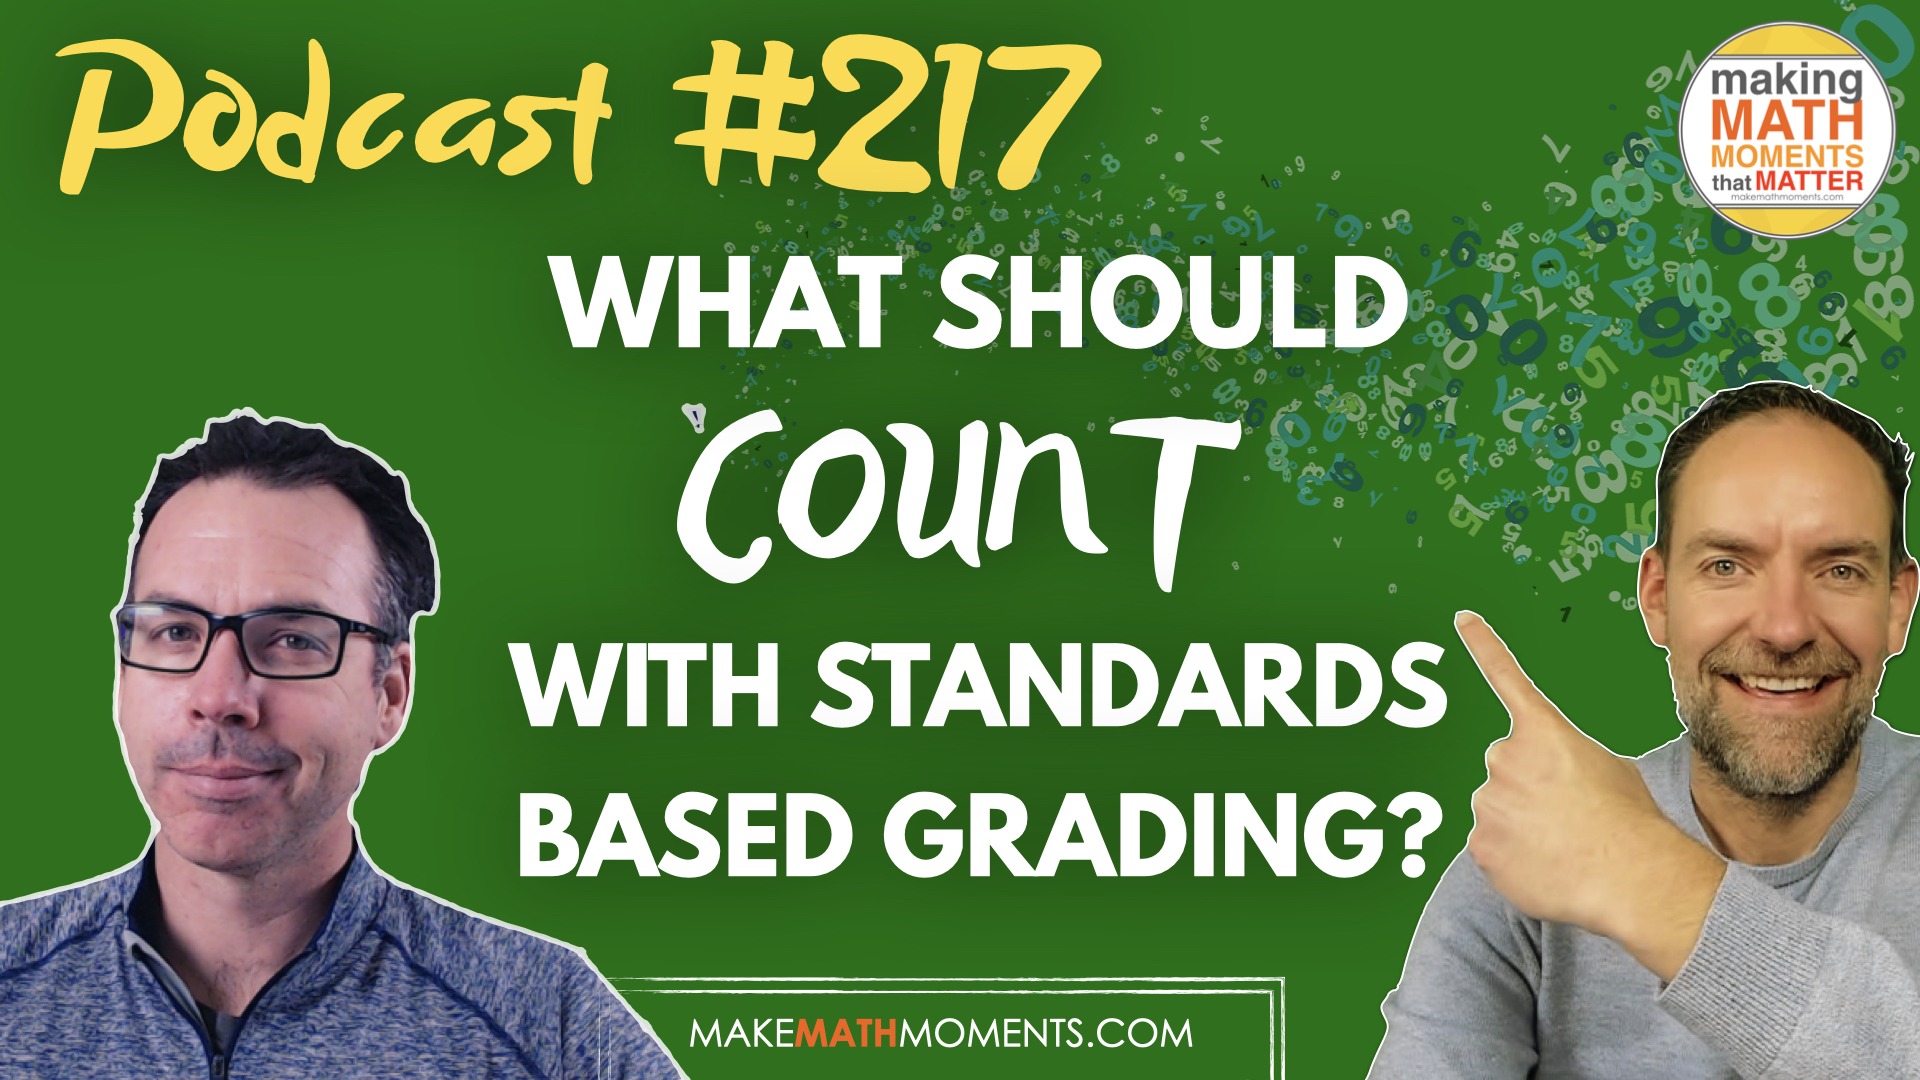 Episode #217: What Should “Count” With Standards Based Grading? – A Math Mentoring Moment